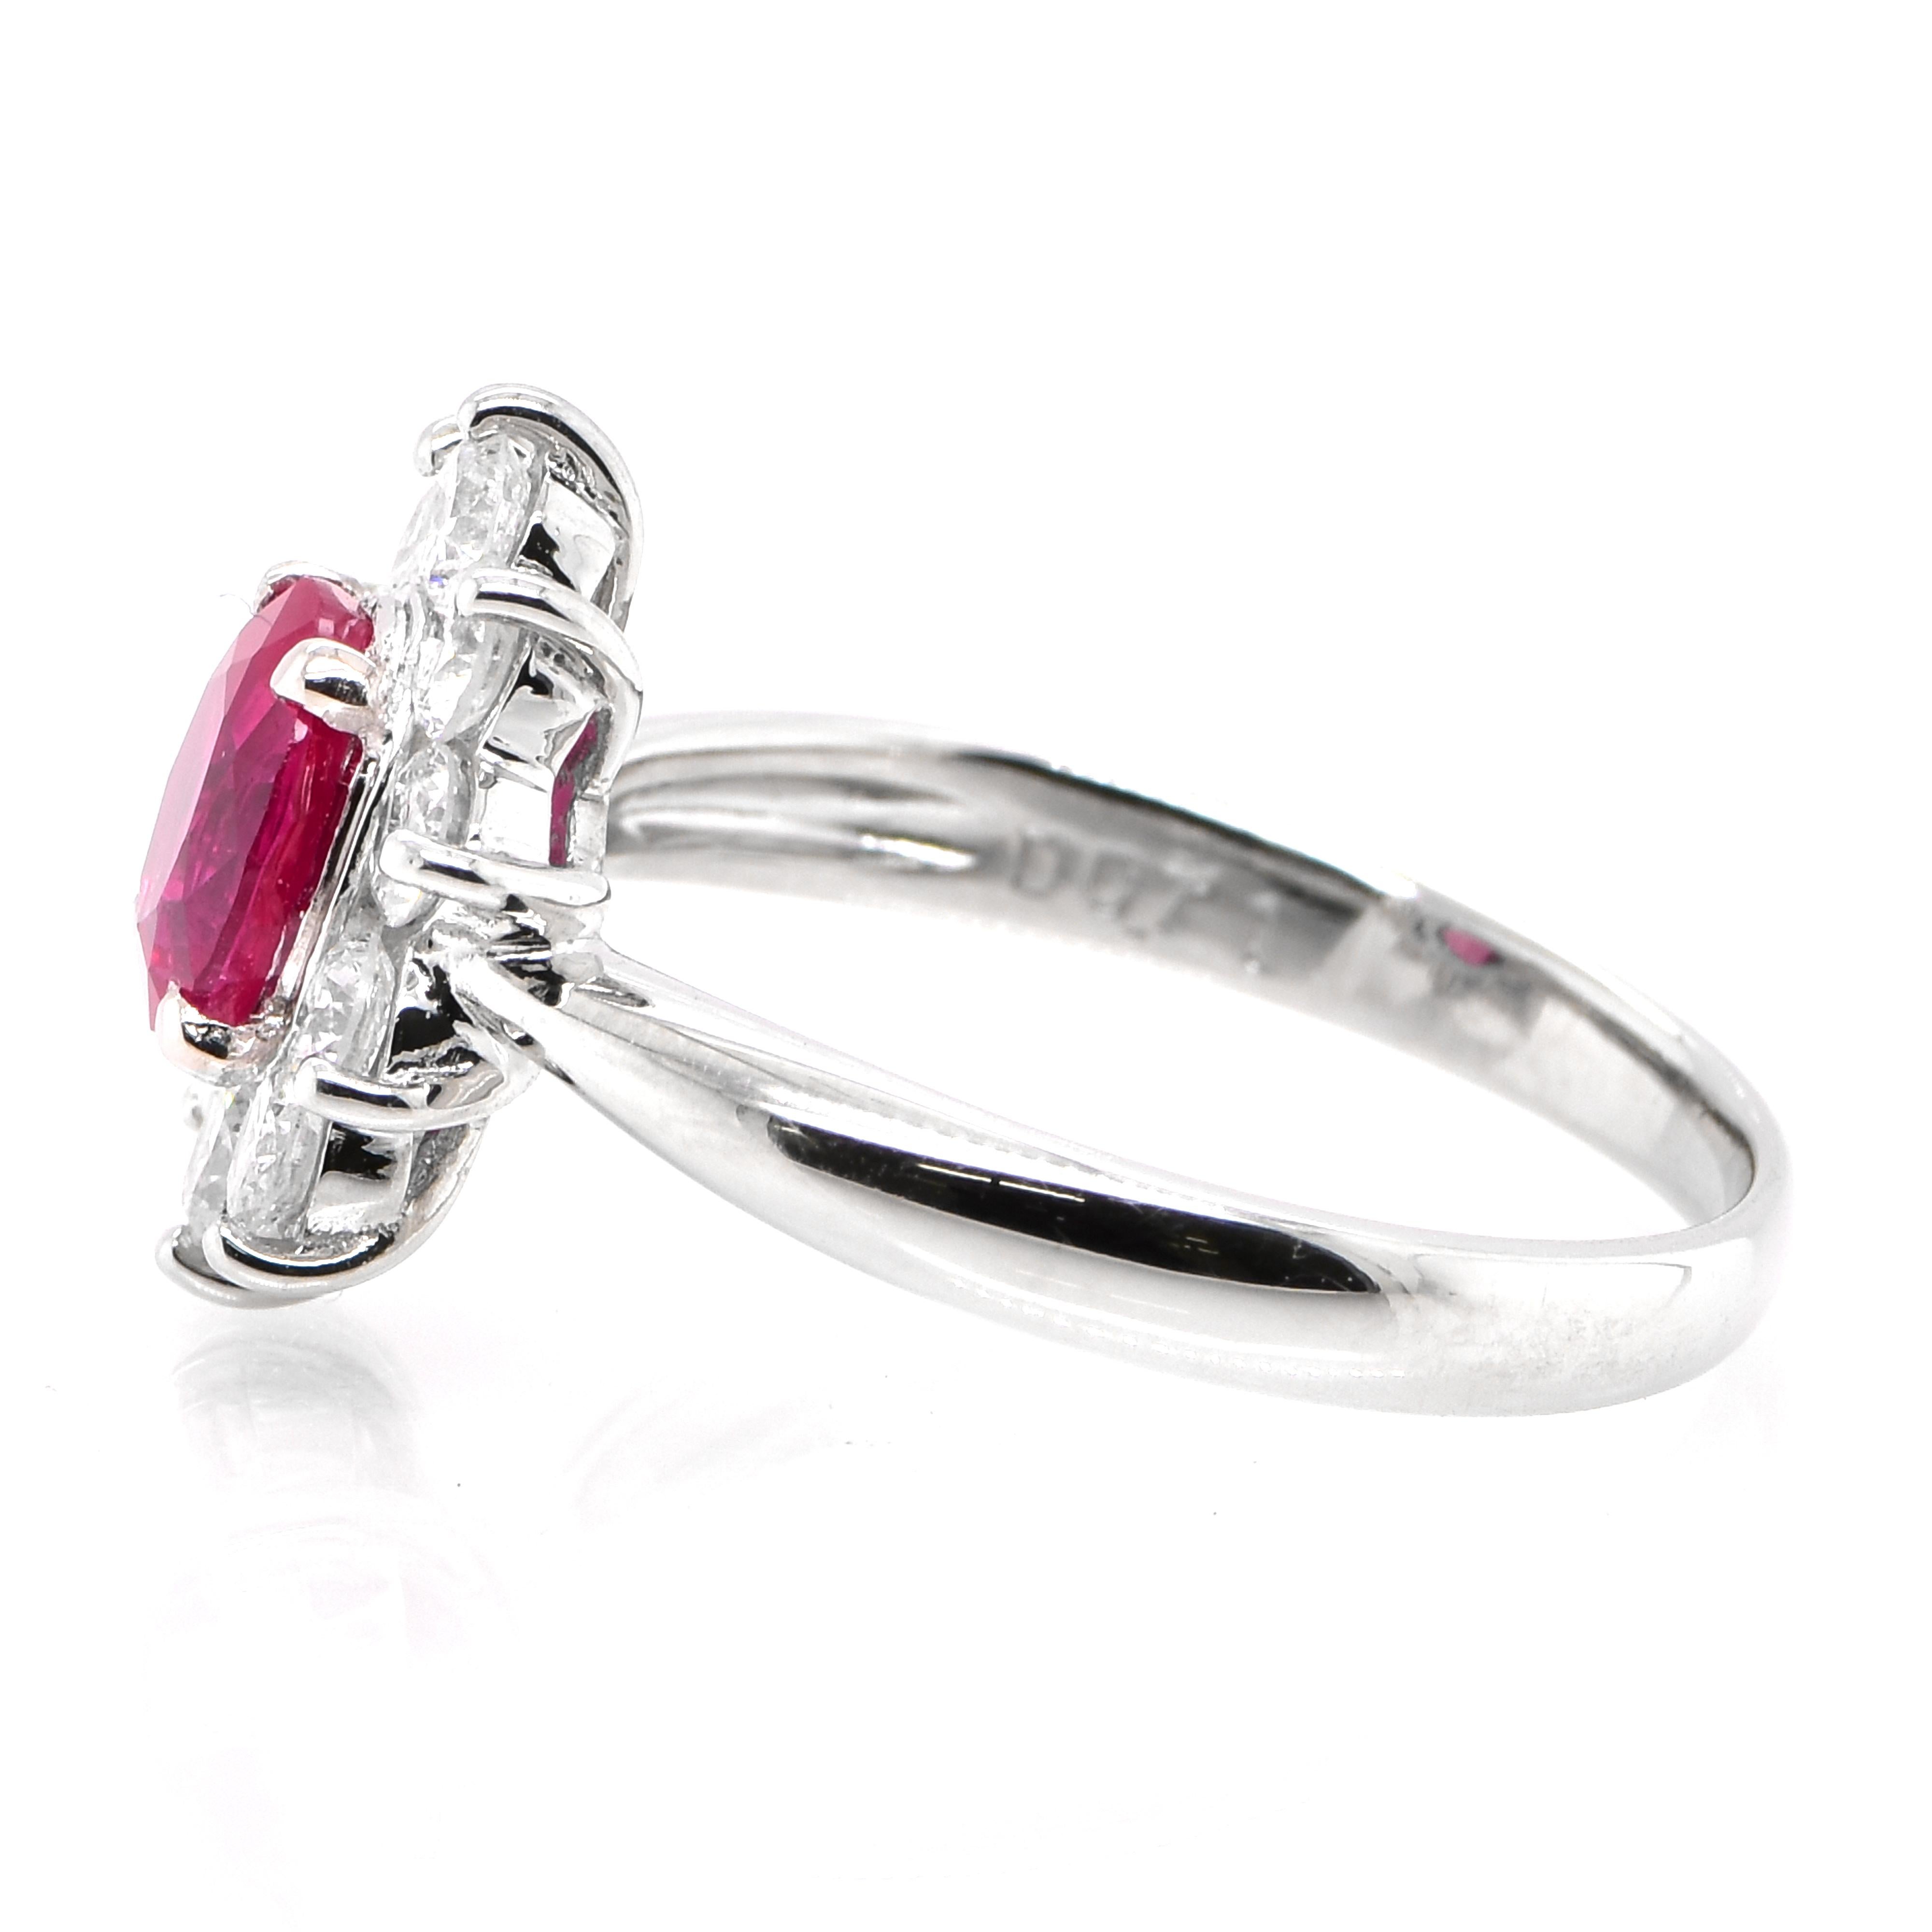 Oval Cut GIA Certified 1.19 Carat, No Heat Burmese Ruby and Diamond Ring Made in Platinum For Sale